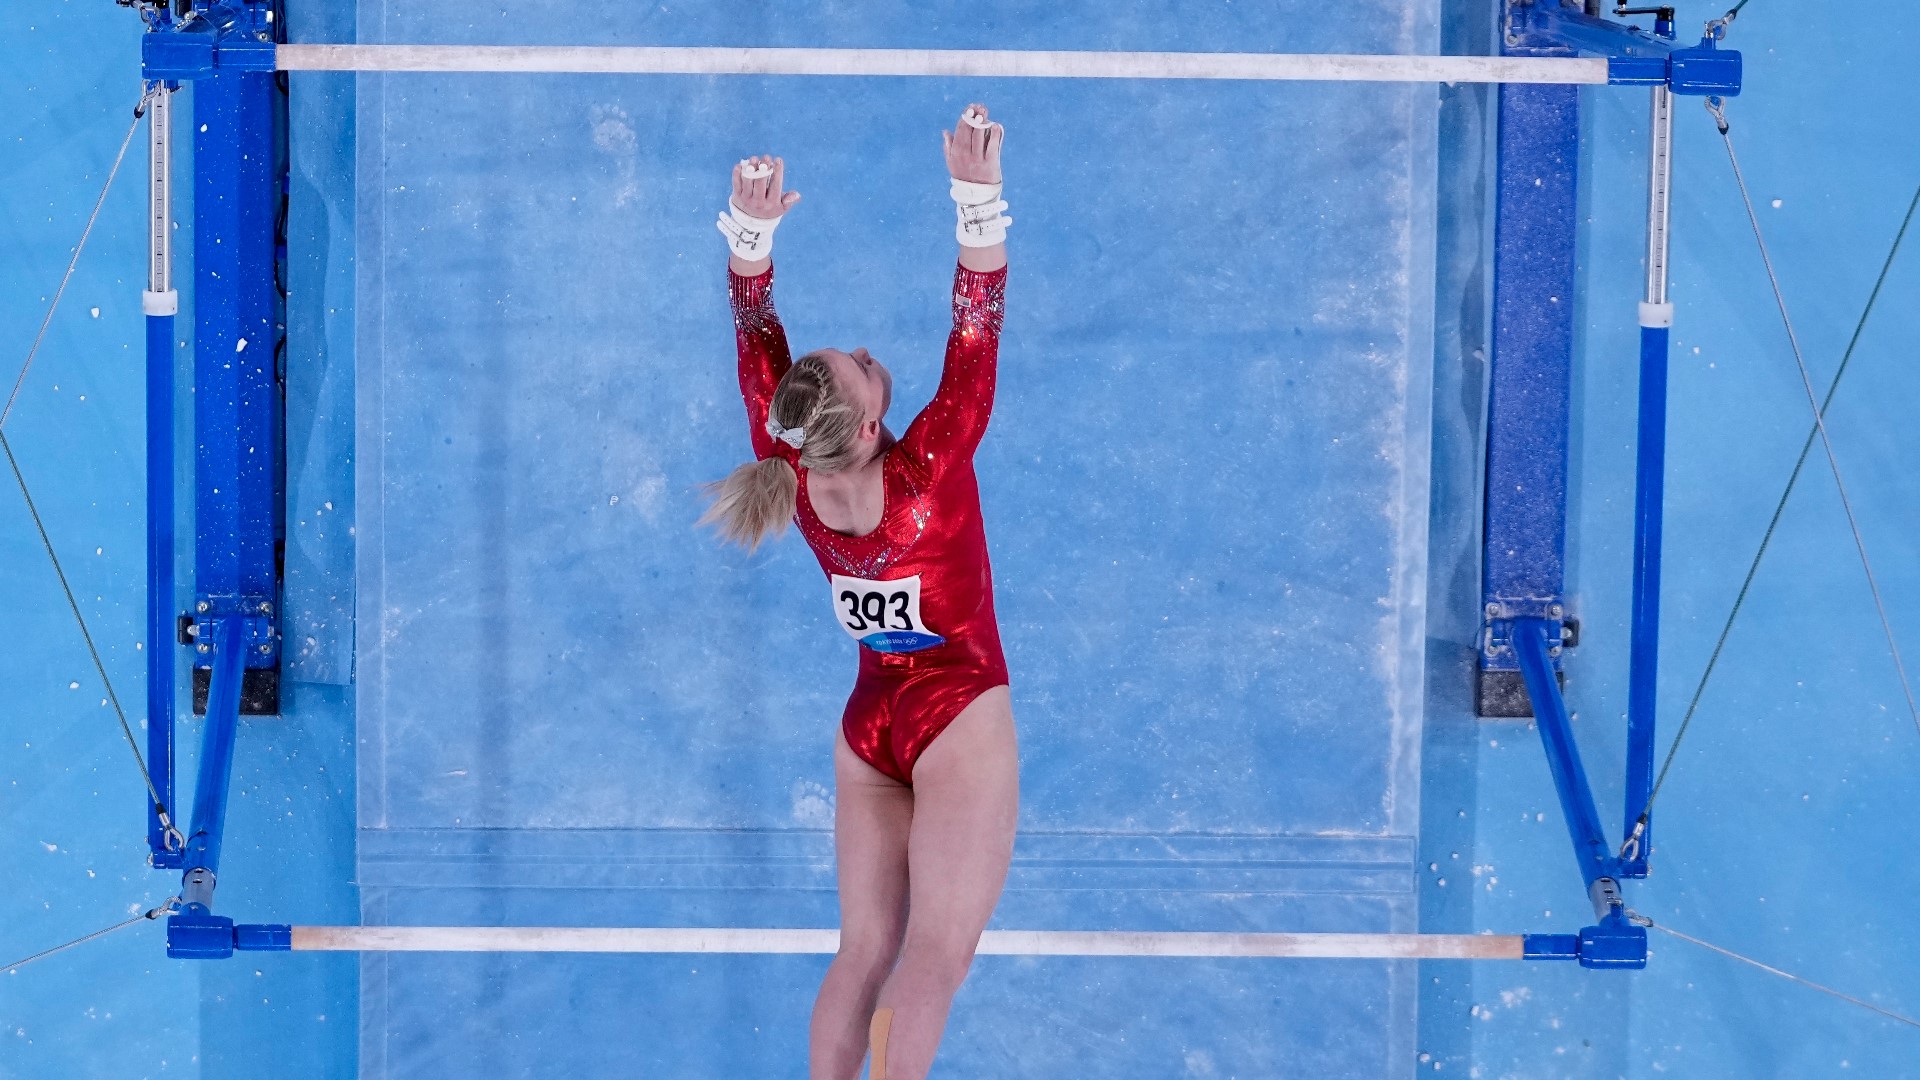 One of the two gymnasts, Jade Carey, has been looking forward to this moment for as long as she can remember.